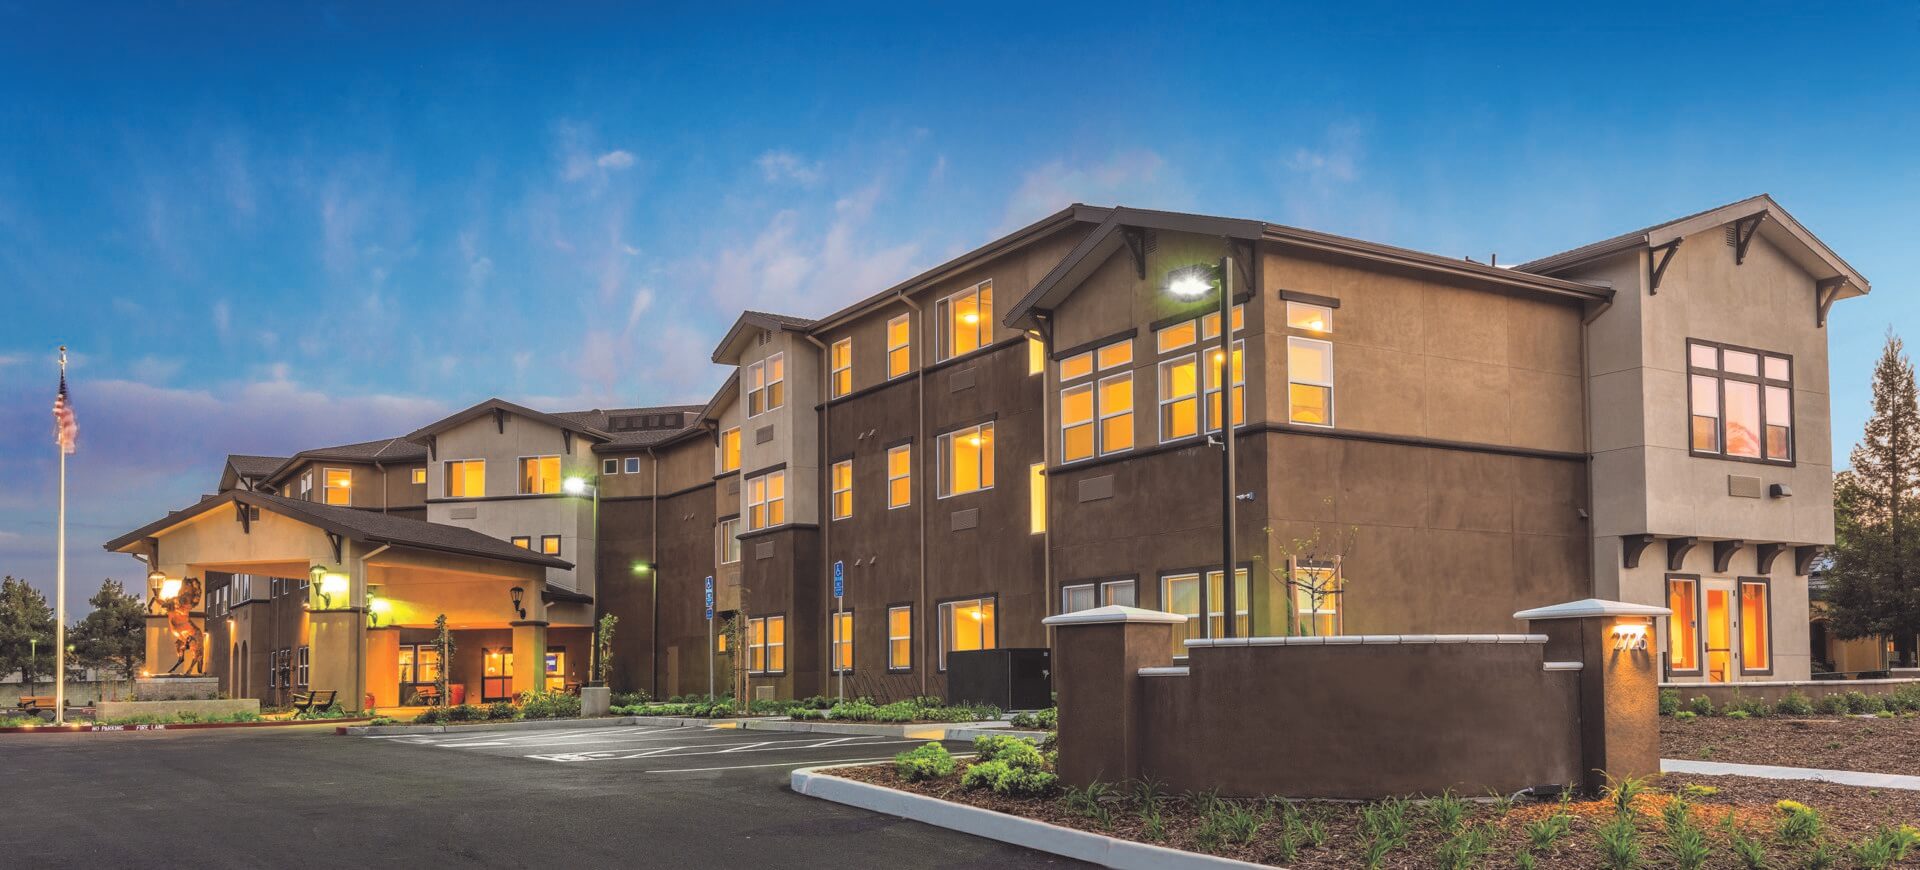 Carlton Senior Living Davis offers Independent Living, Assisted Living and Memory Care for seniors in Yolo County and beyond.